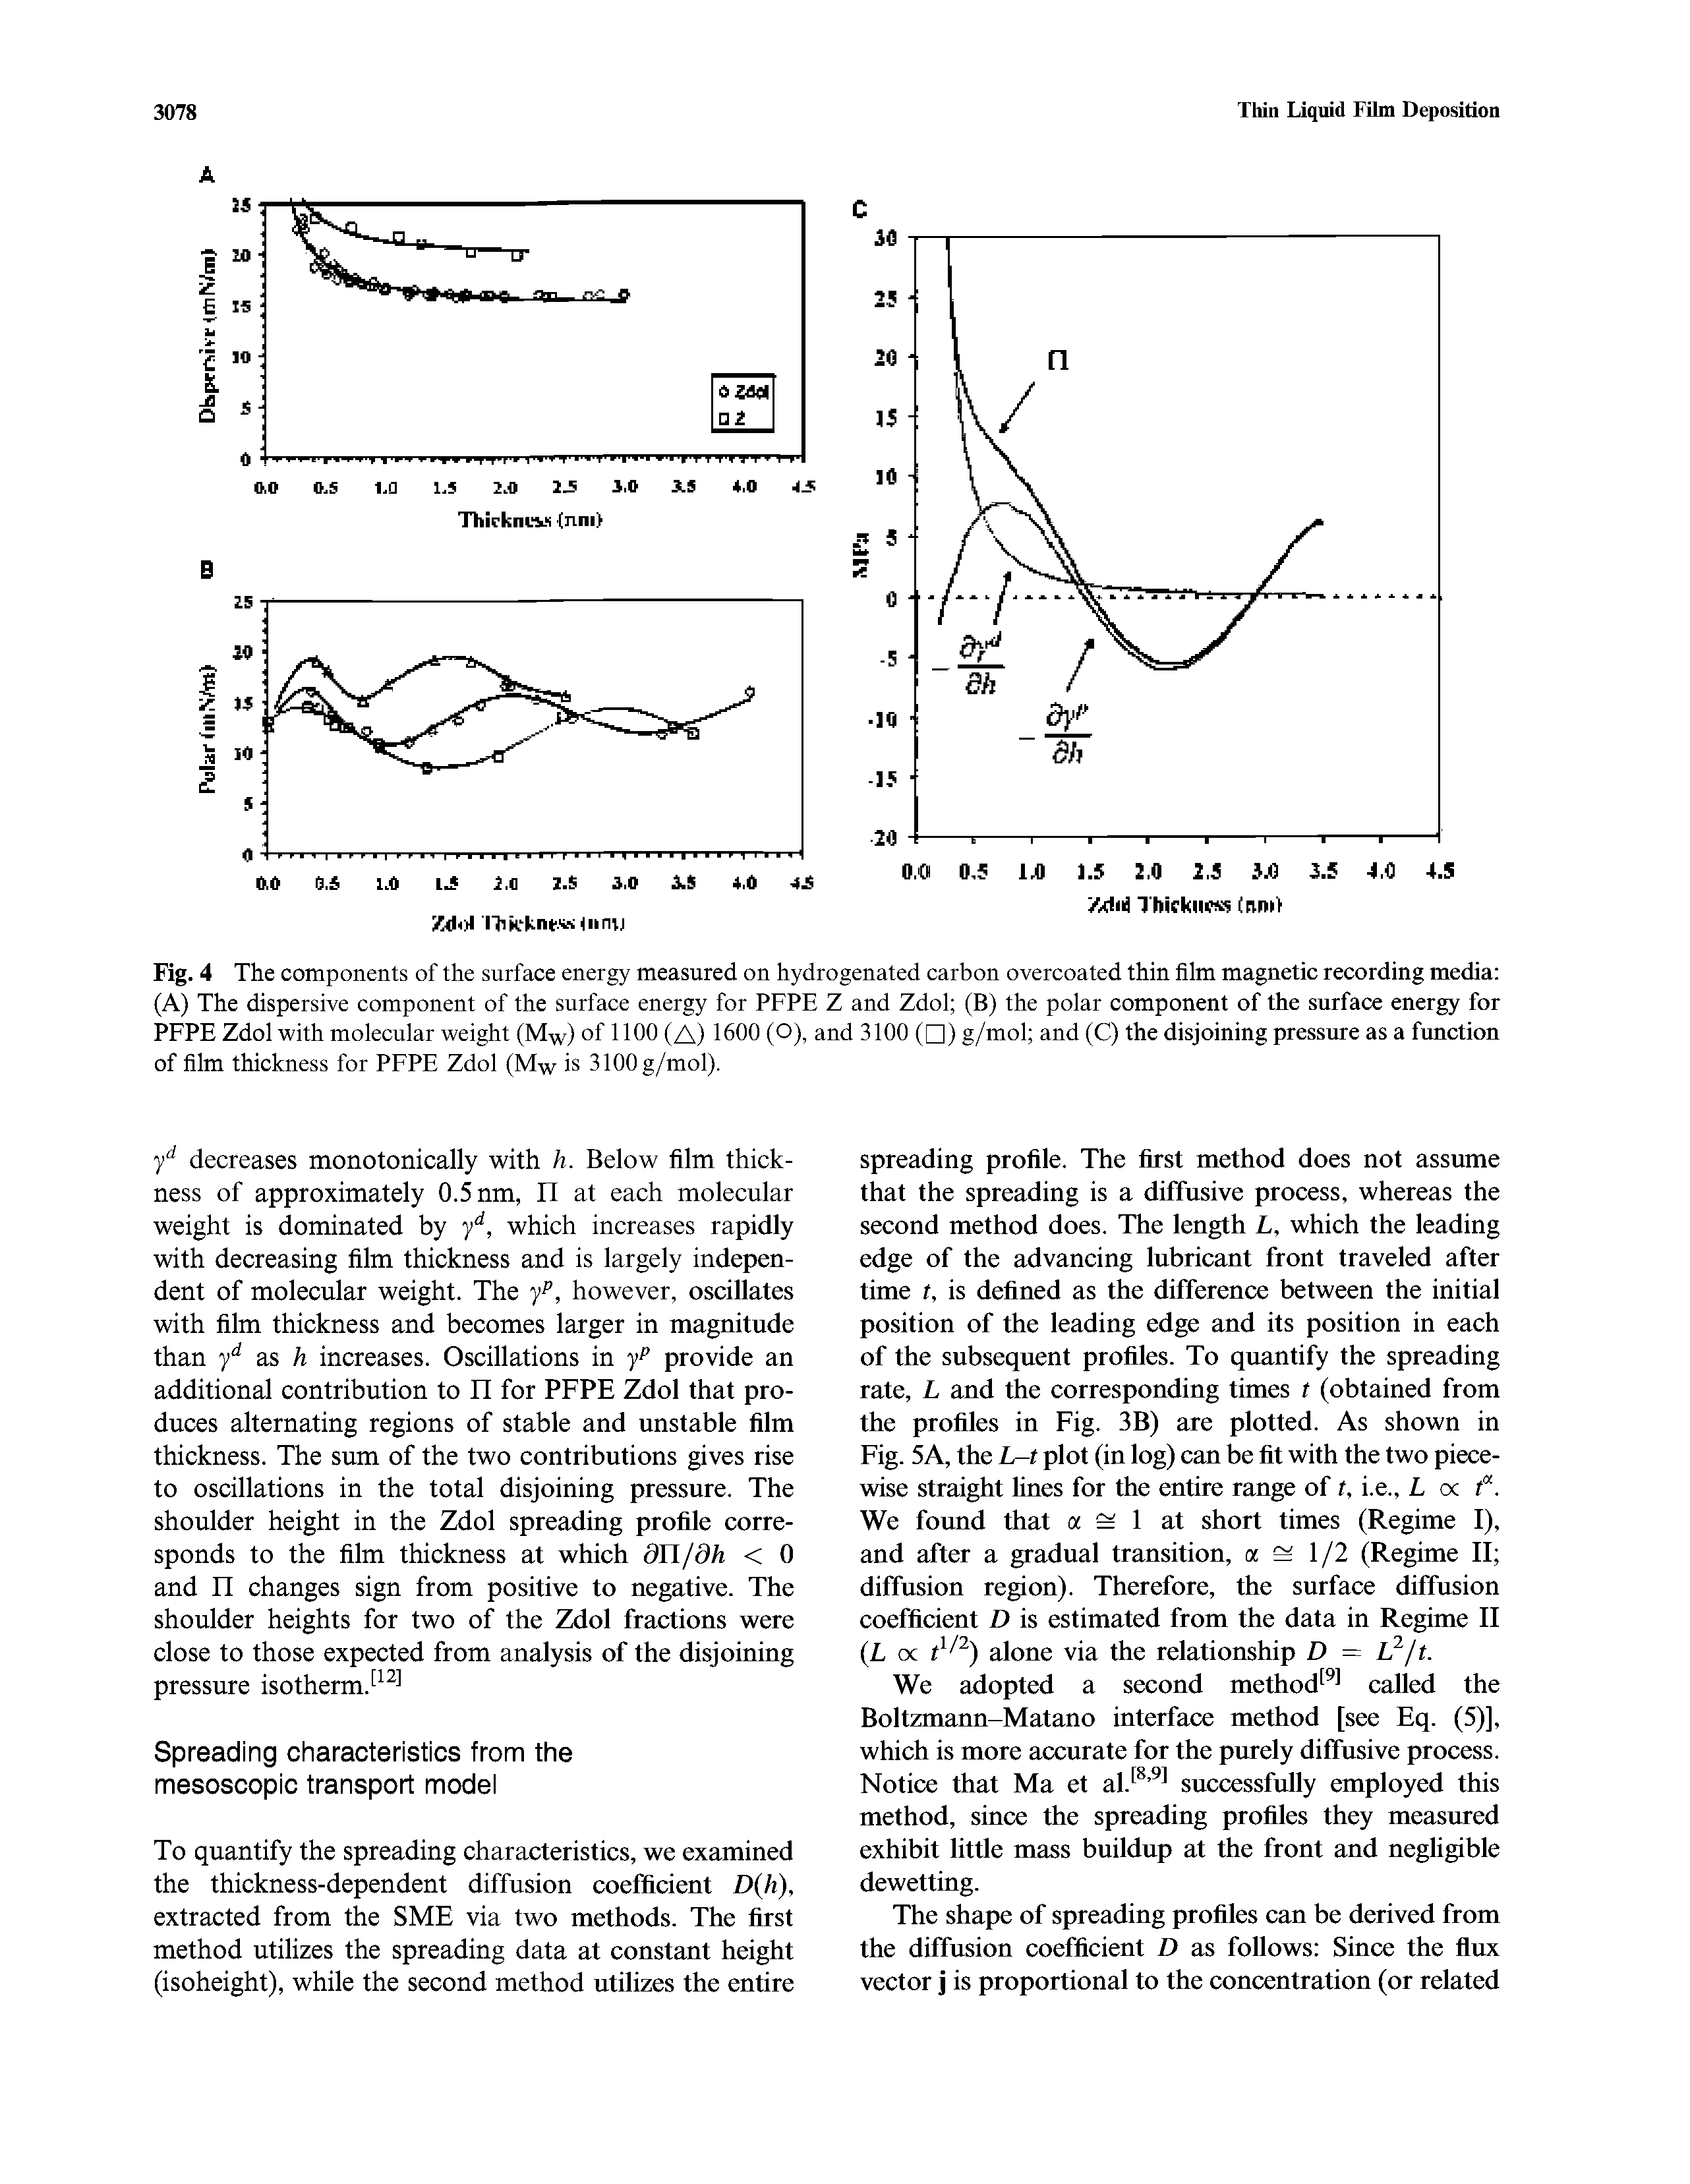 Fig. 4 The components of the surface energy measured on hydrogenated carbon overcoated thin film magnetic recording media (A) The dispersive component of the surface energy for PFPE Z and Zdol (B) the polar component of the surface energy for PFPE Zdol with molecular weight (M-w) of 1100 (A) 1600 (O), and 3100 ( ) g/mol and (C) the disjoining pressure as a function of film thickness for PFPE Zdol (Mw is 3100 g/mol).